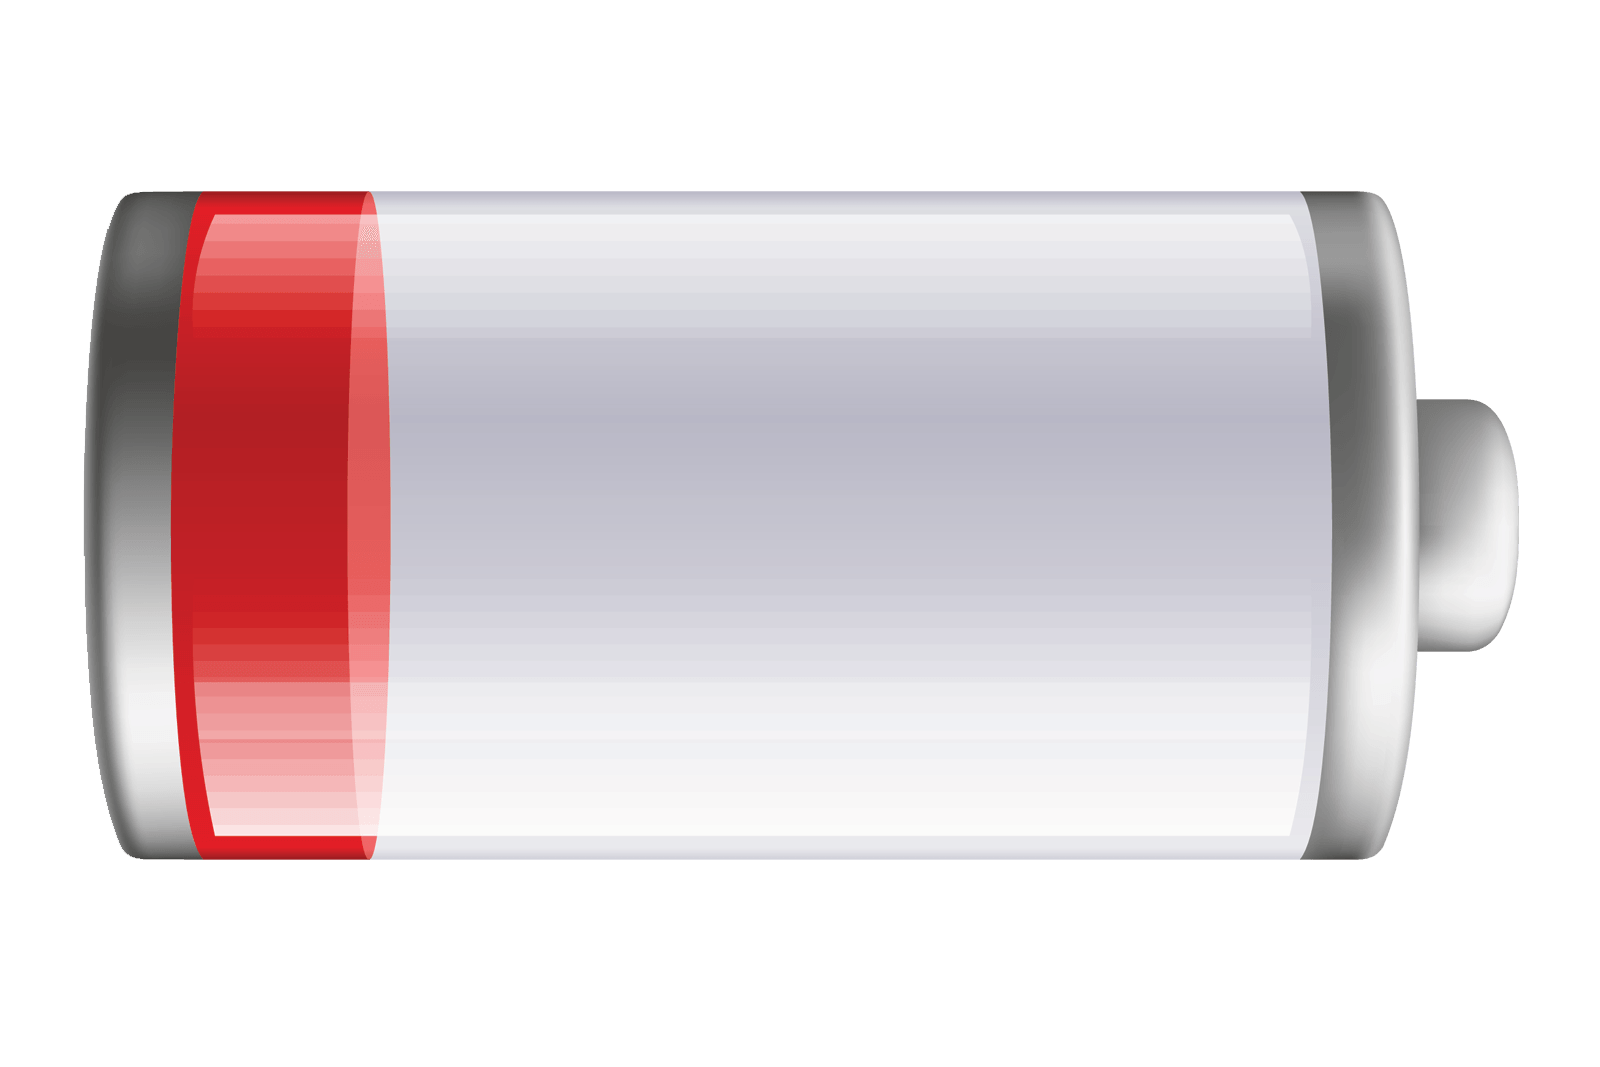 Battery Low HD Image Free PNG Image